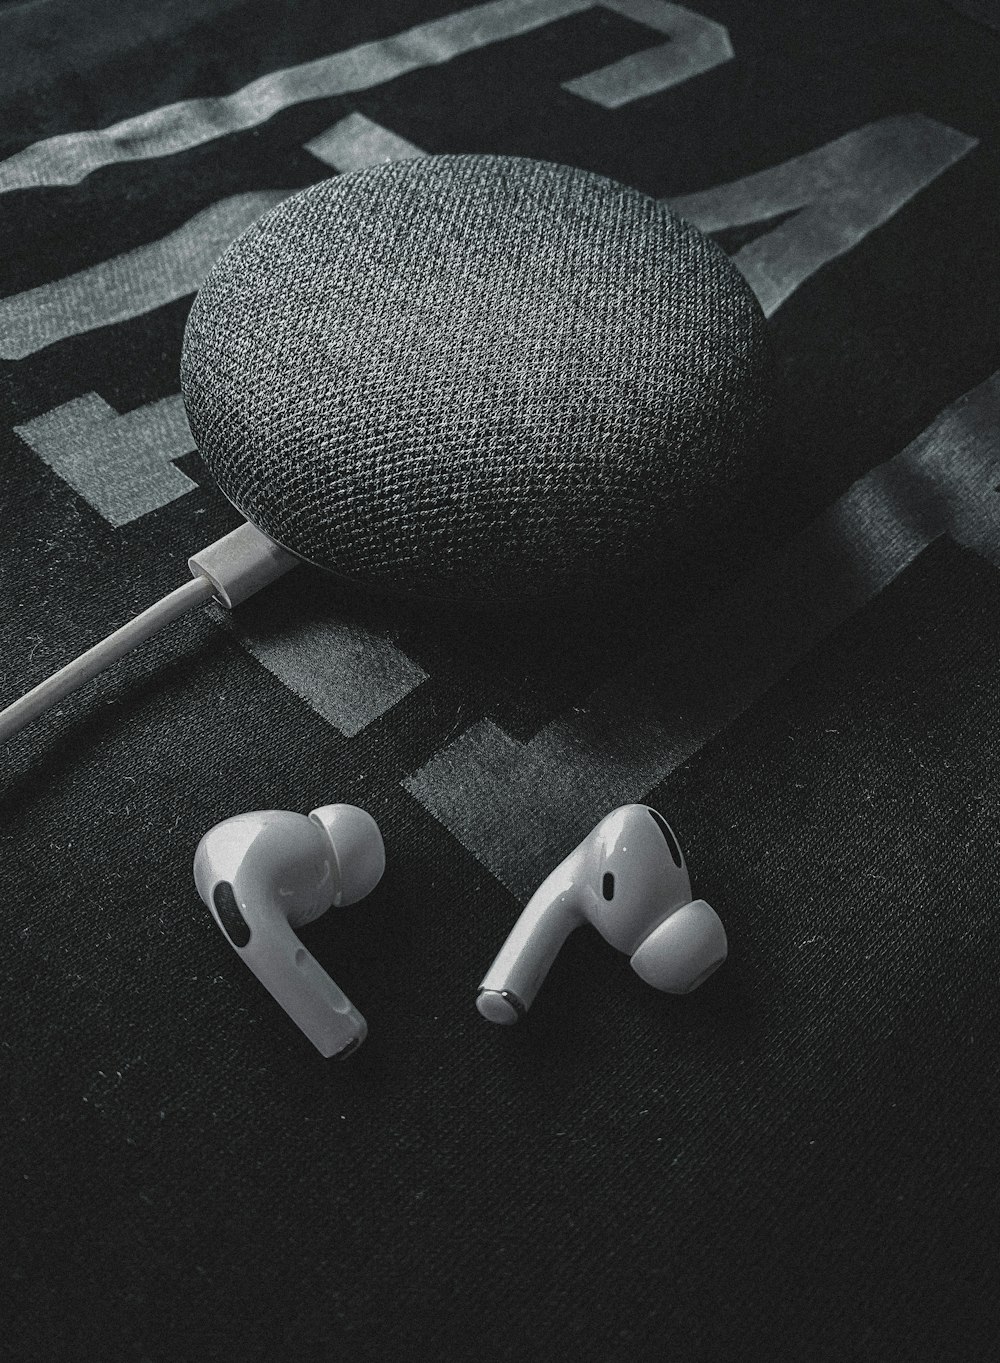 white earbuds on black textile